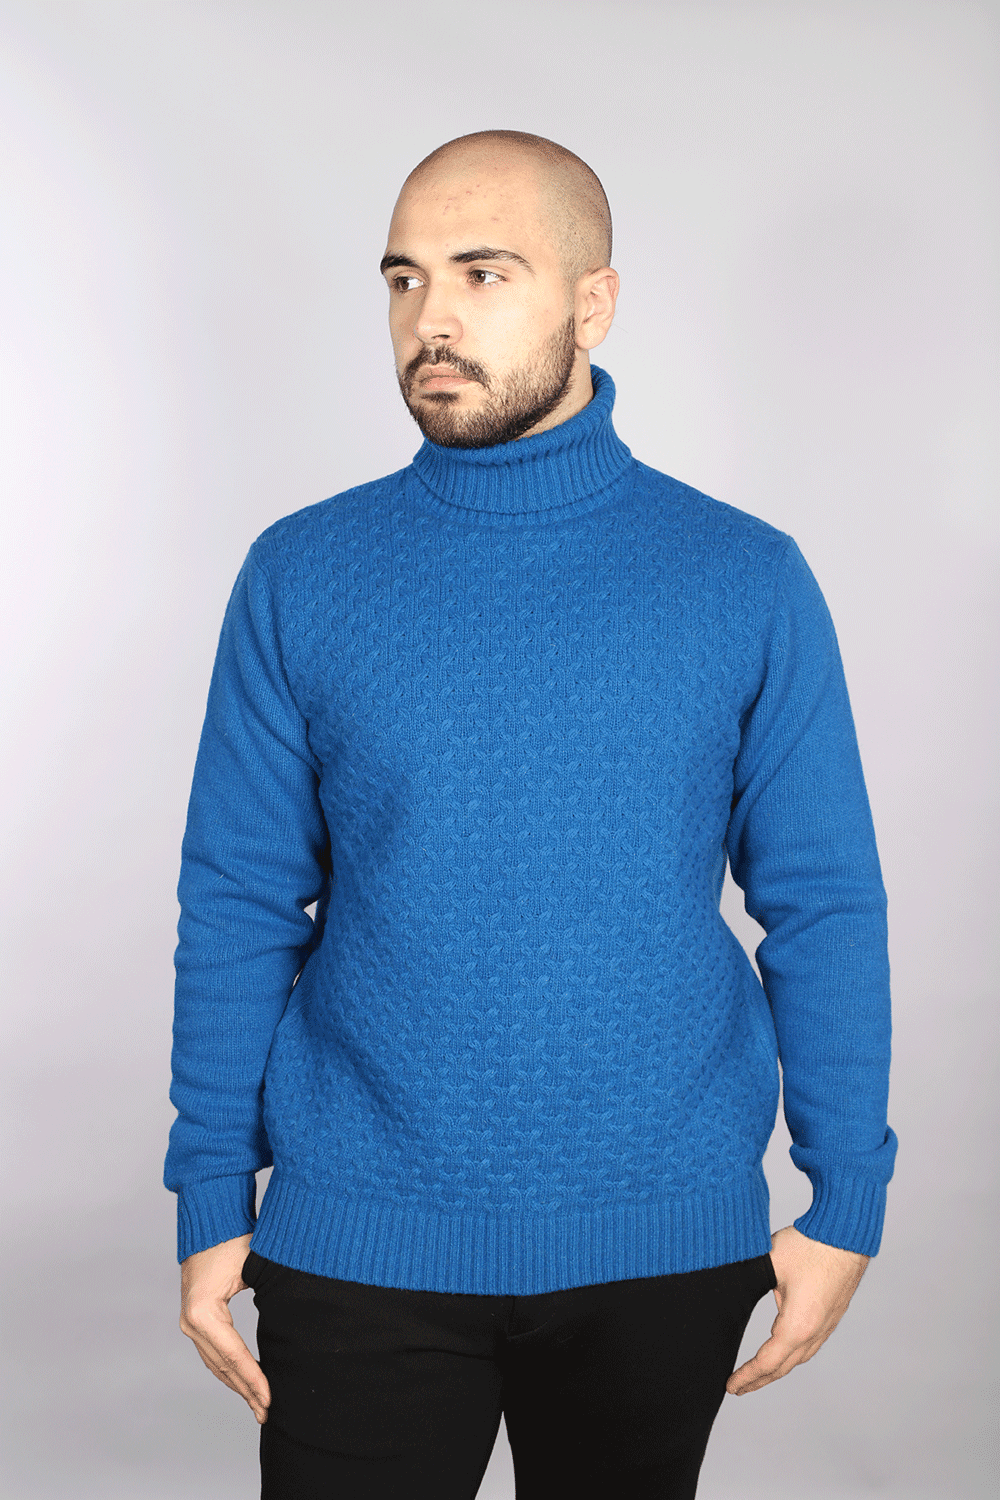 Royal Blue Cable Knit Turtle Neck - 7 Downie St.®